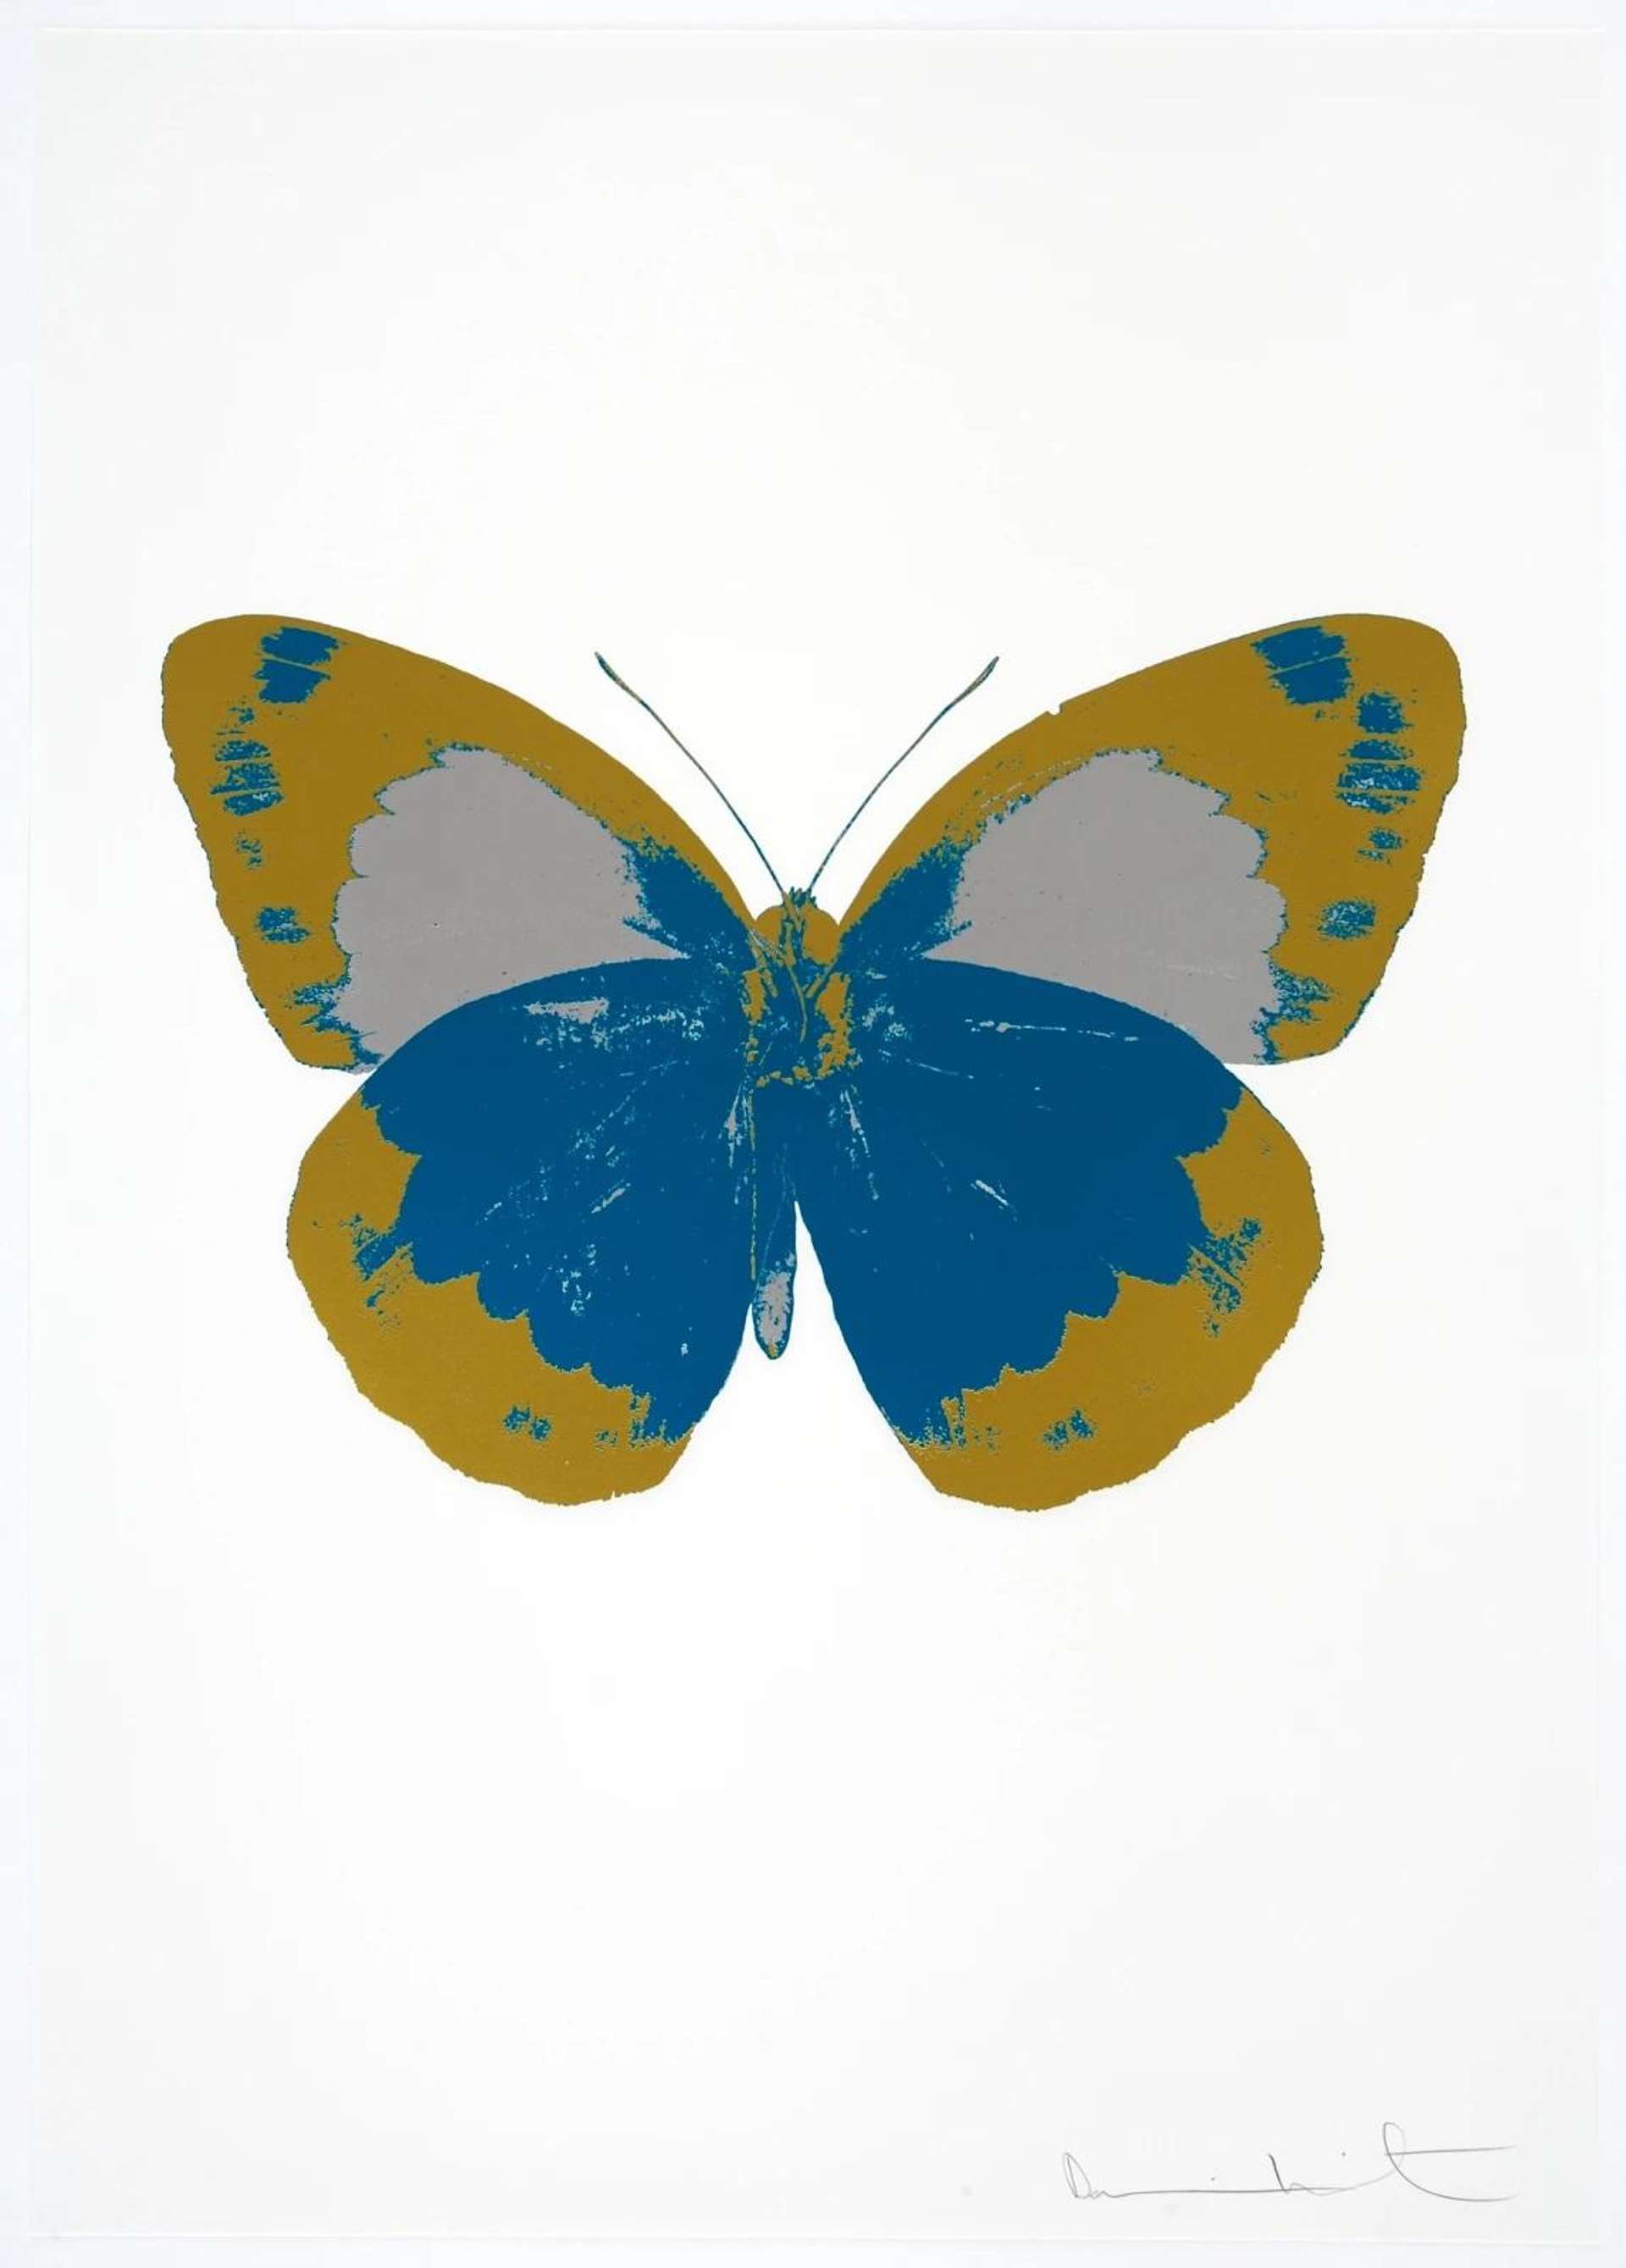 Damien Hirst: The Souls II (turquoise, oriental gold, silver gloss) - Signed Print